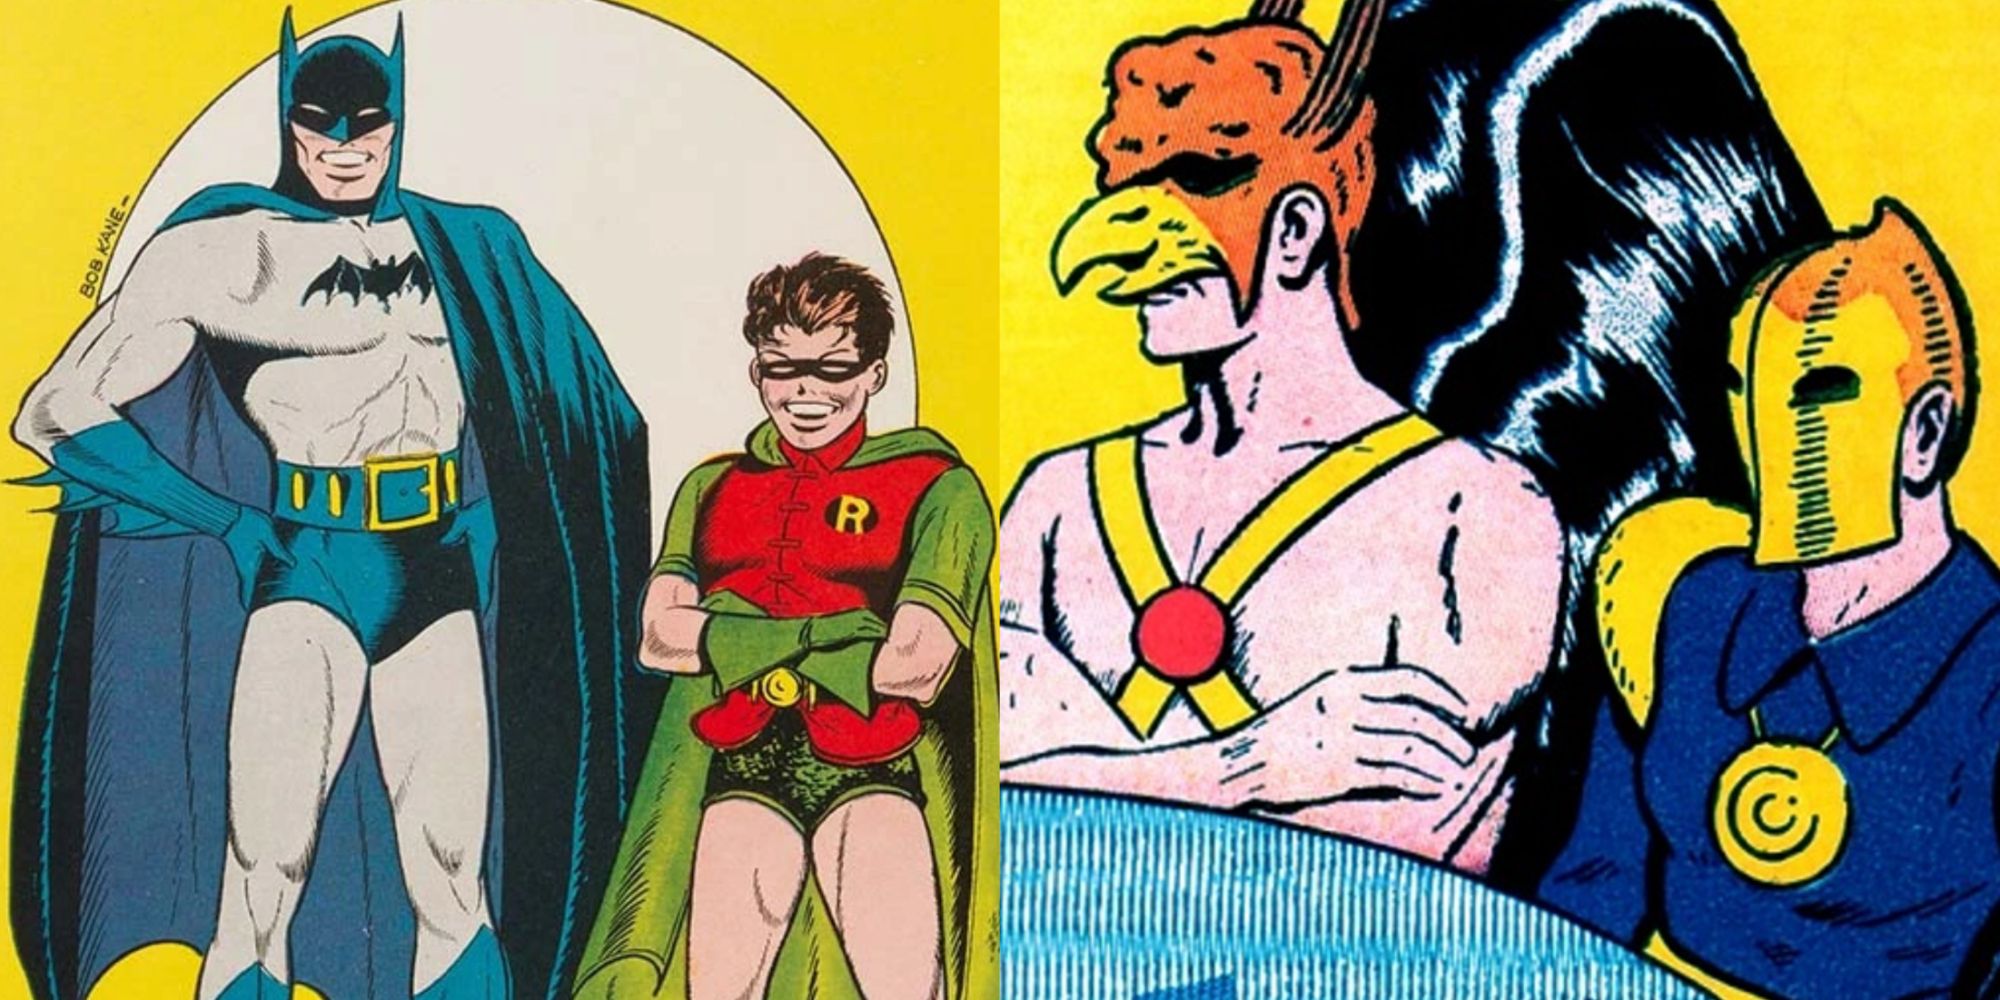 Split image of Batman with Robin and Hawkman with Doctor Fate in DC comics